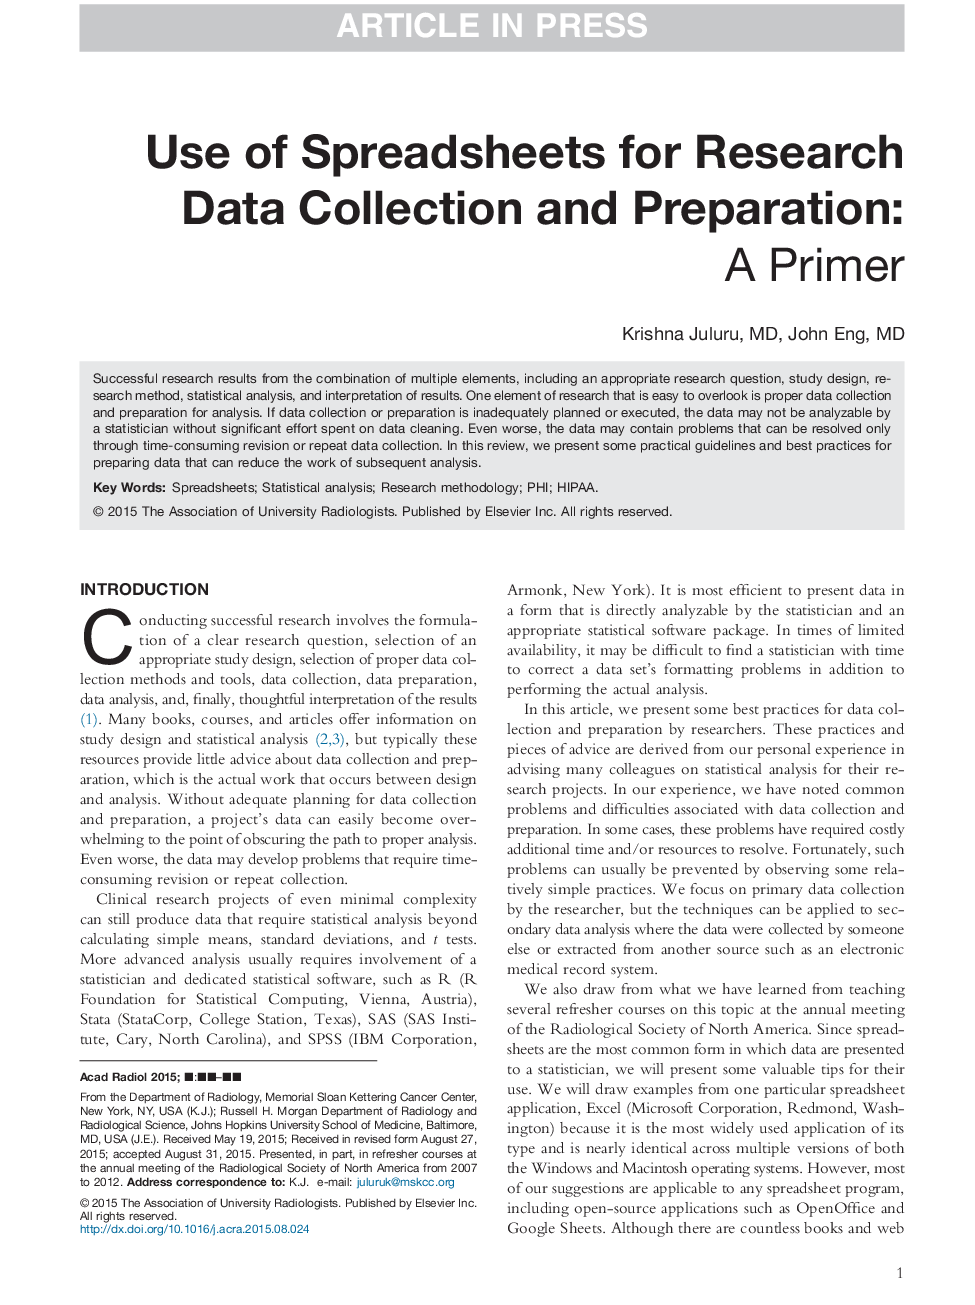 Use of Spreadsheets for Research Data Collection and Preparation: